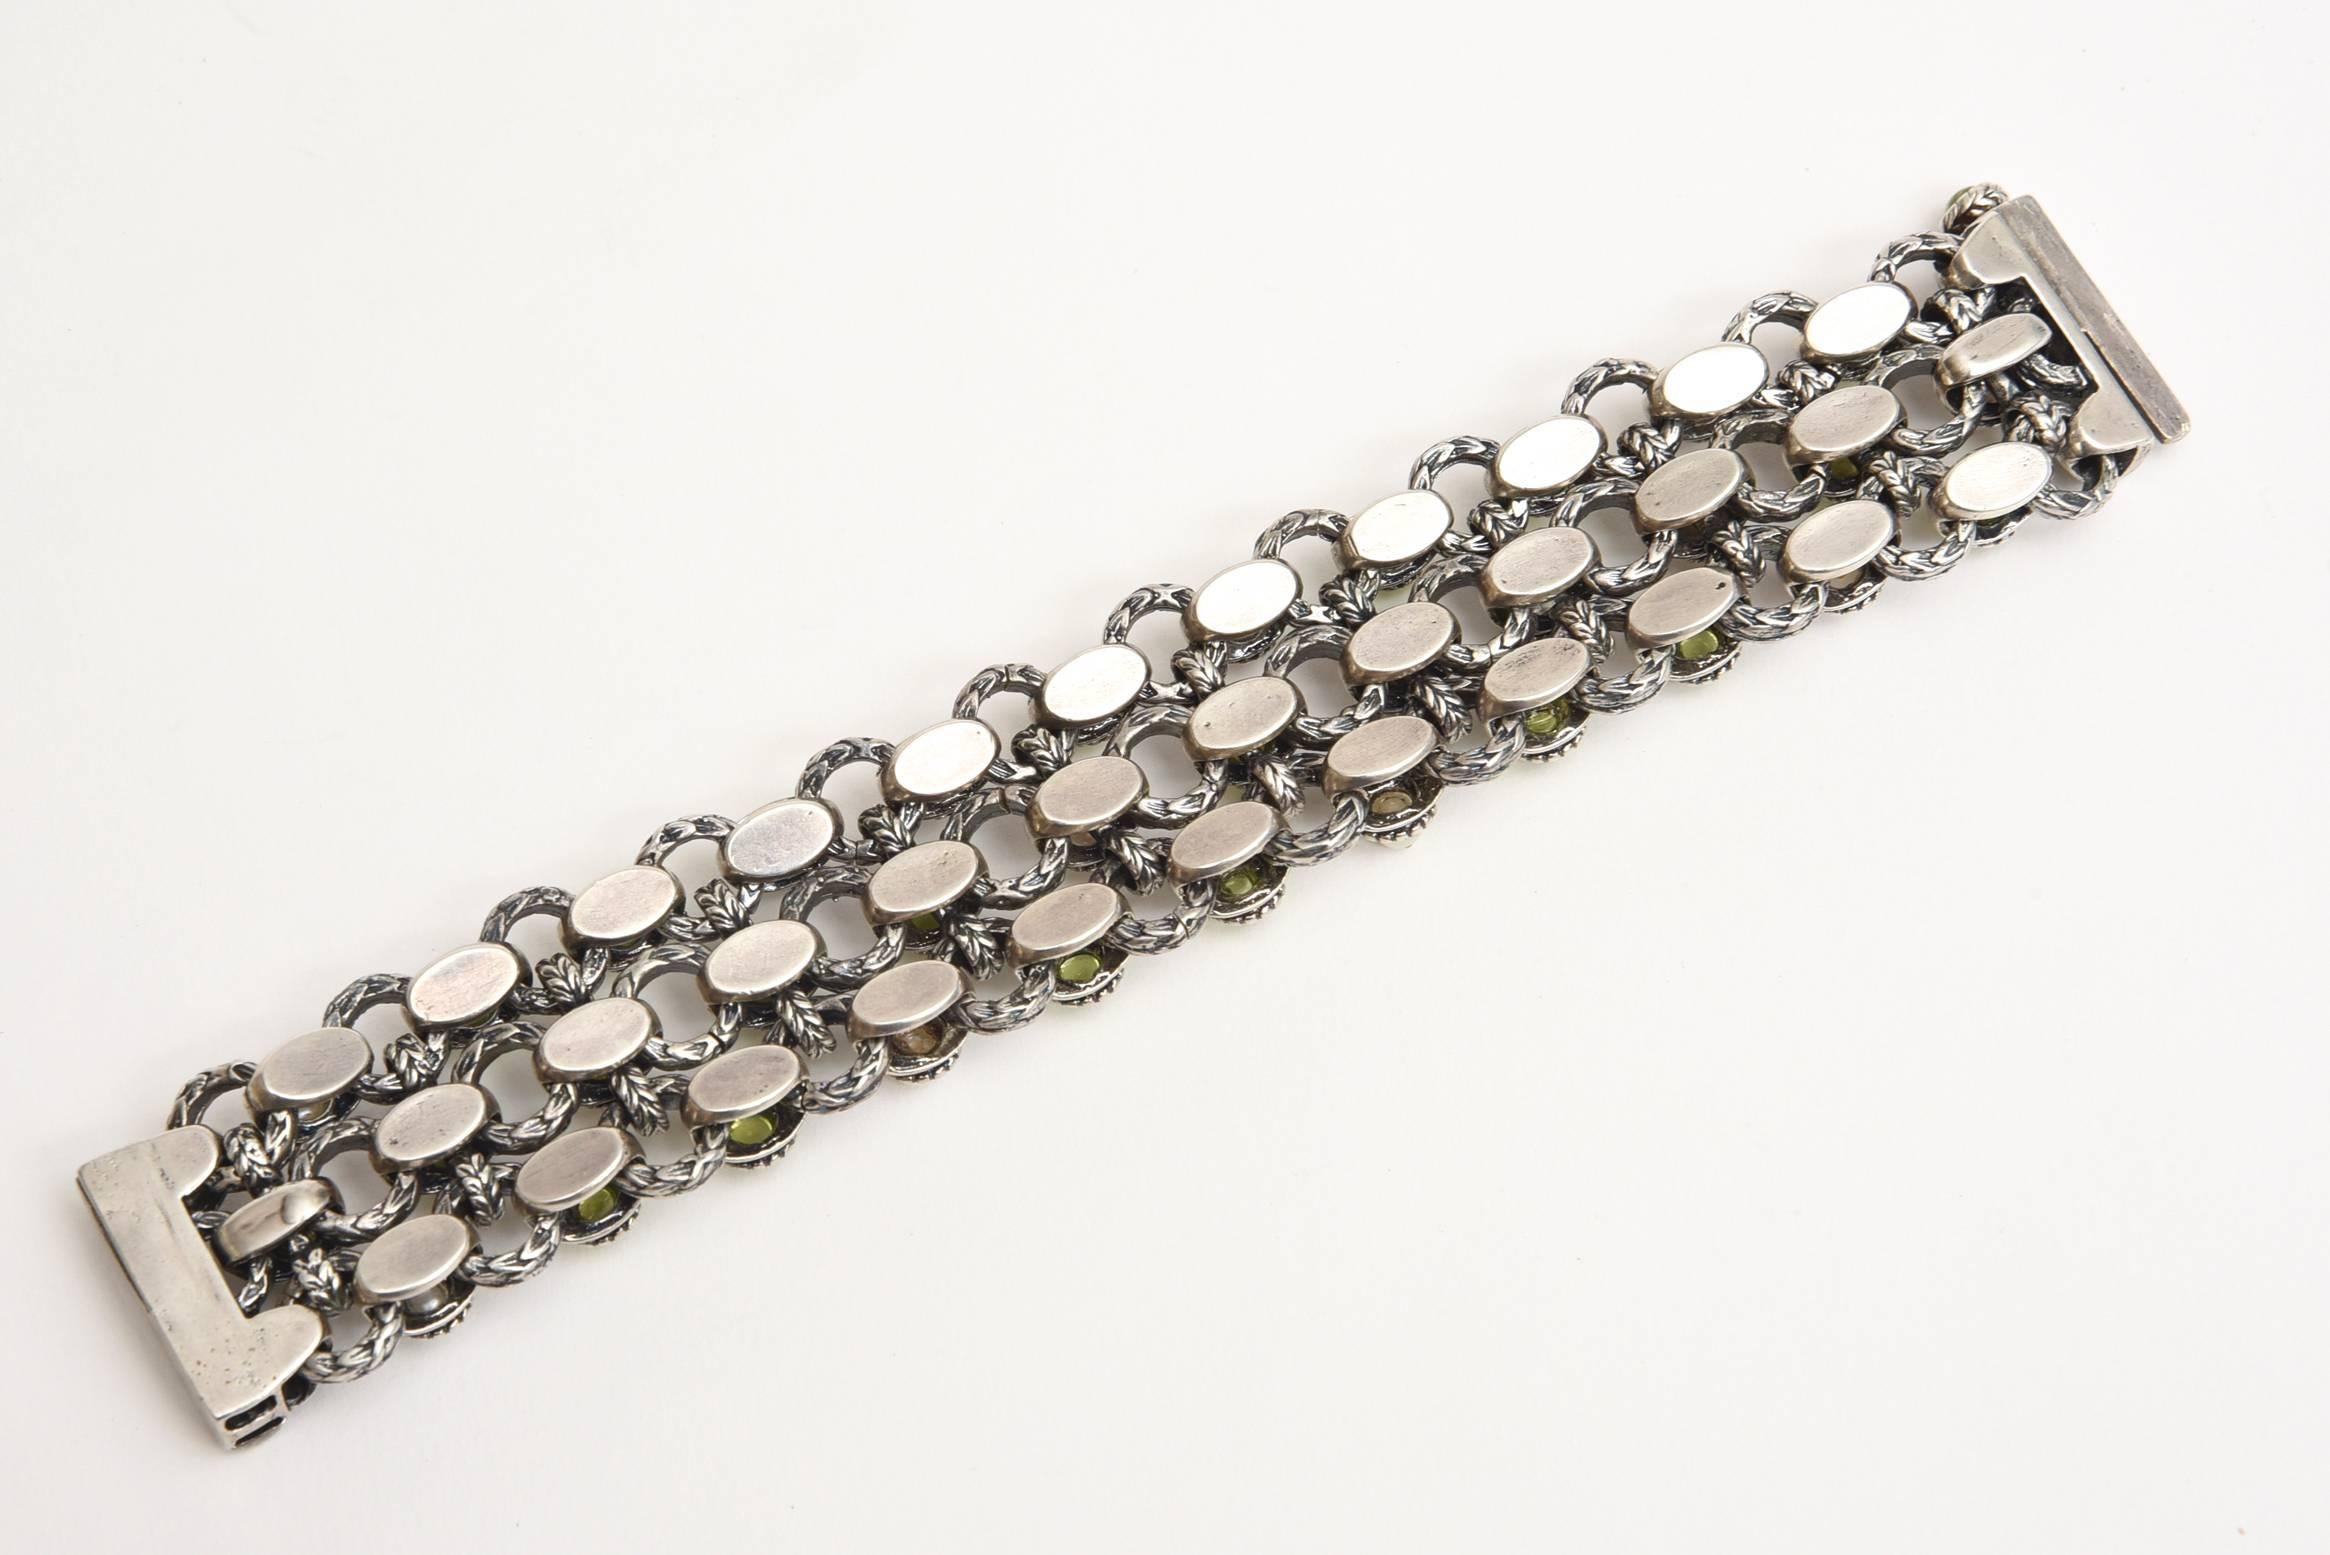 This beautiful bracelet designed by Ned Bowman whom is an American jeweler is set against sterling silver with rows of alternating authentic real pearls and real peridot This was designed about 30 years ago by him and was his 1st launch of his 3 row